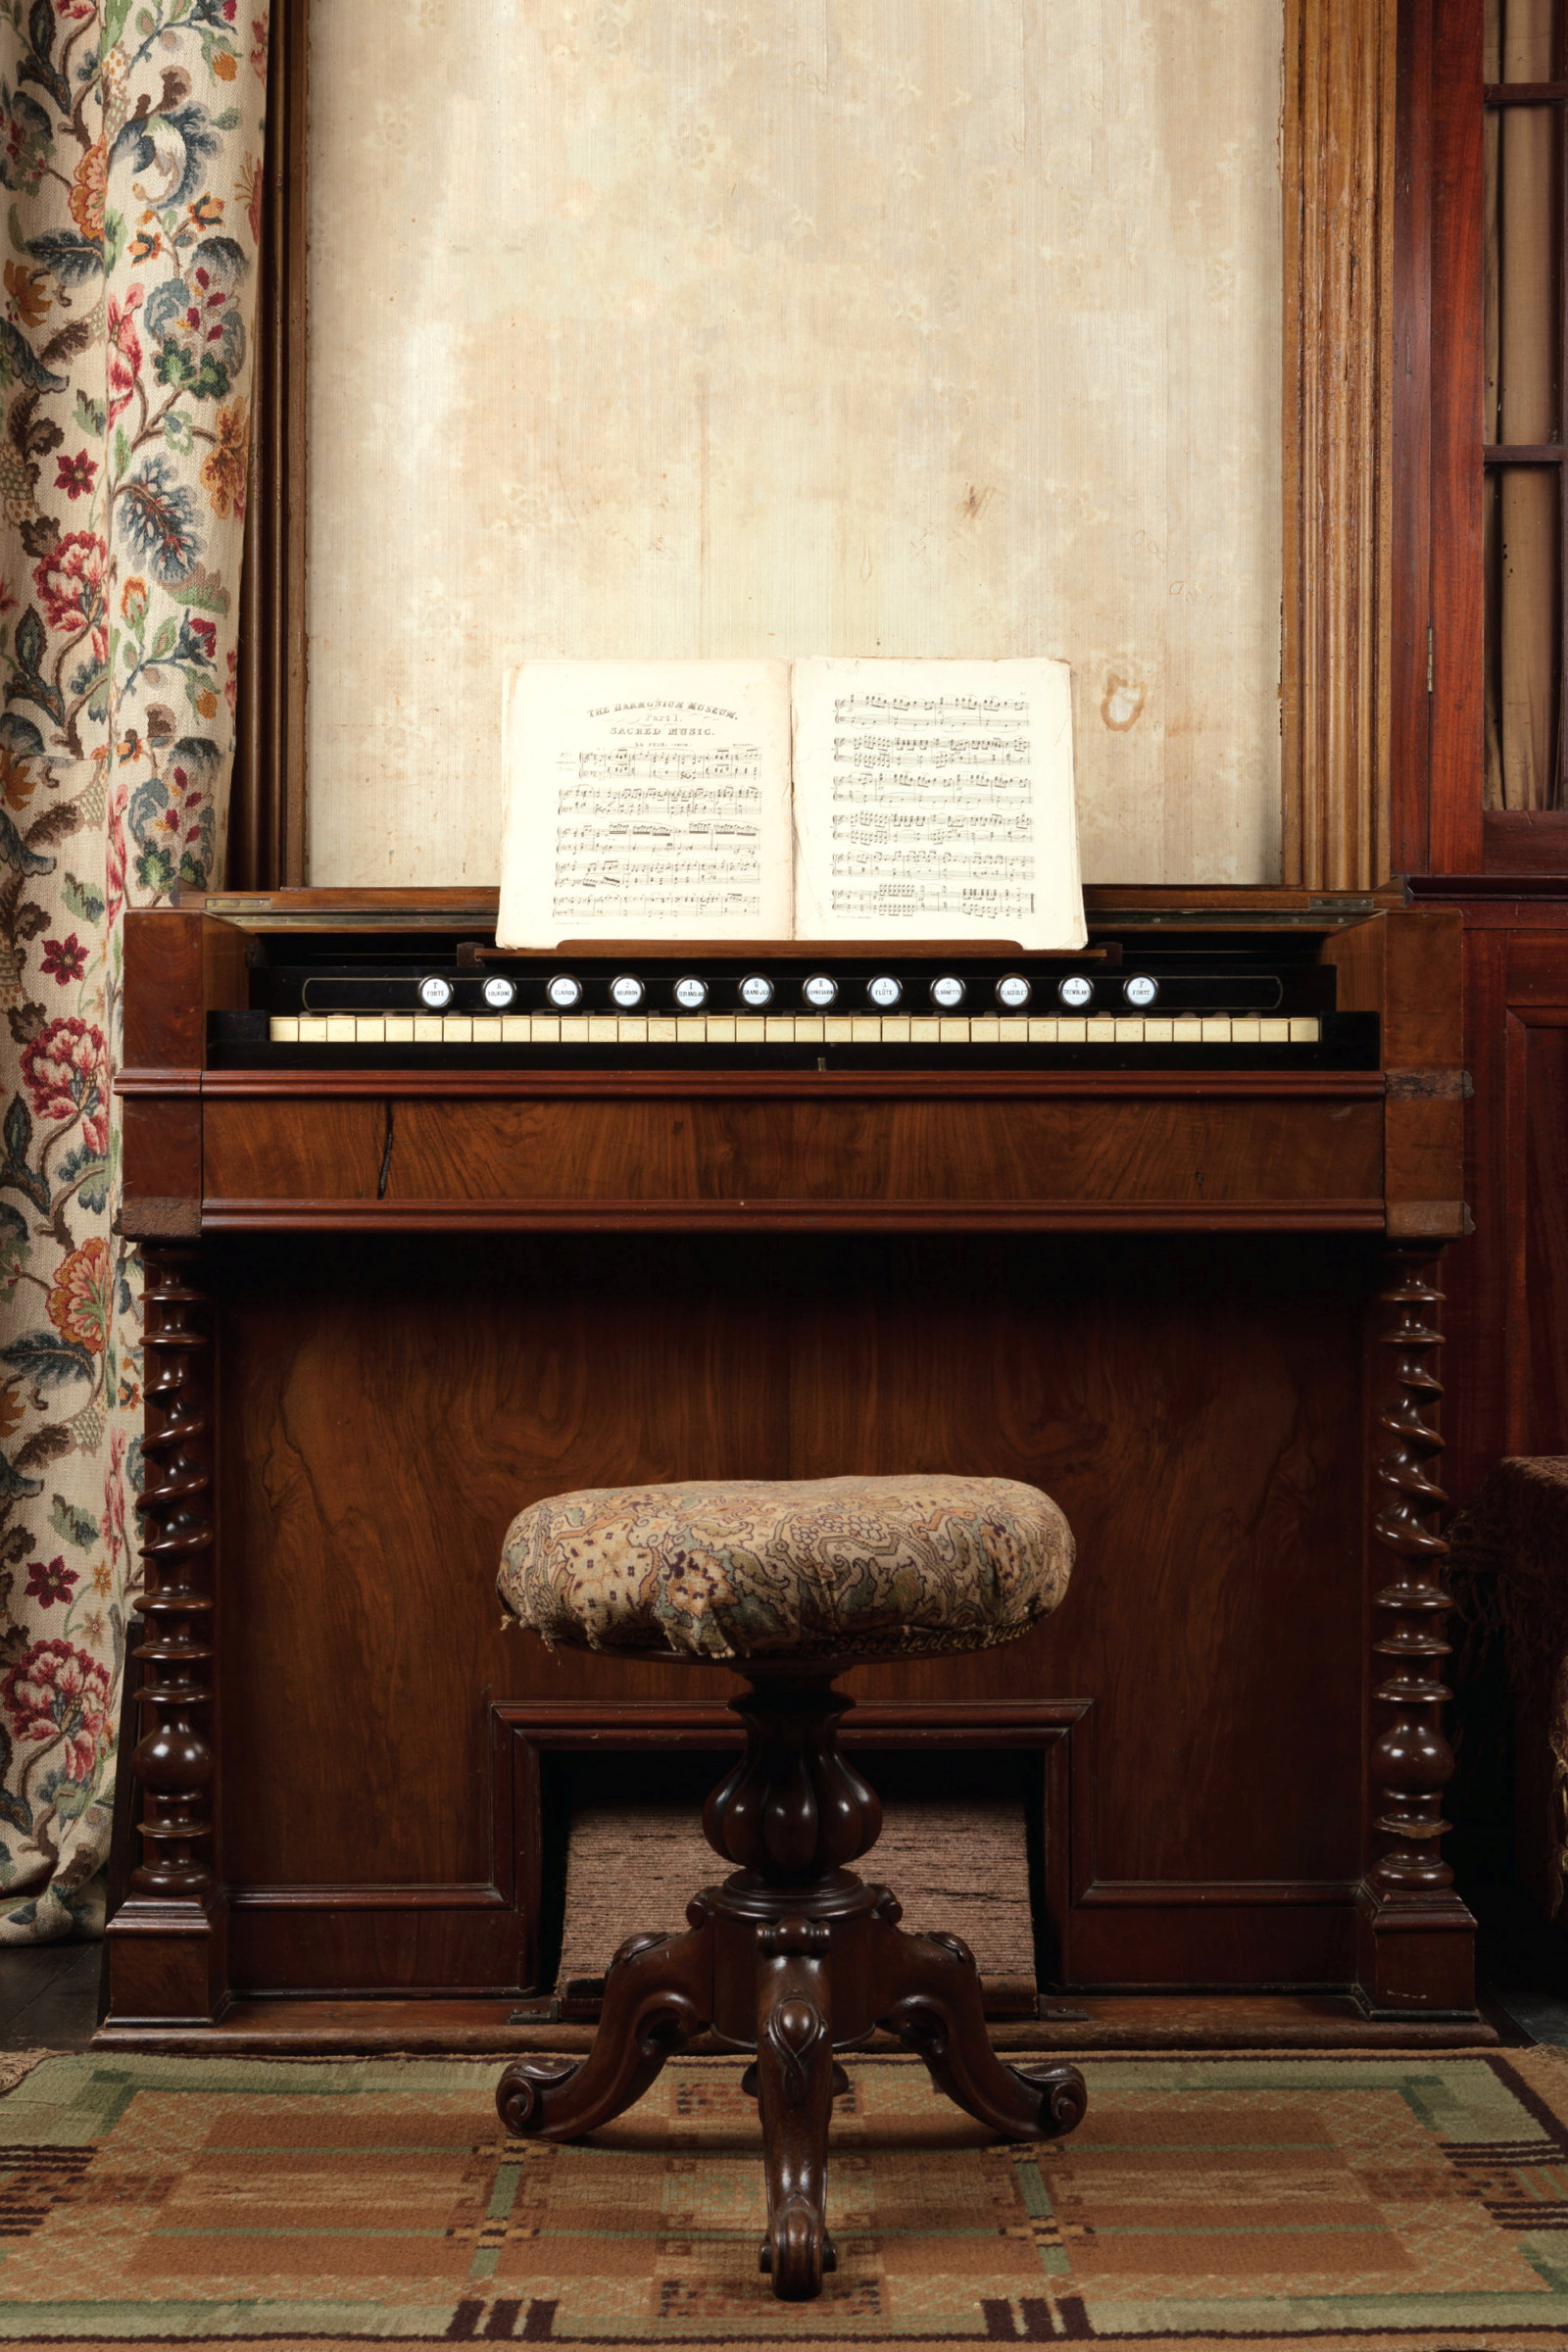 Harmonium viewed straight on, with stool and music book open on stand.